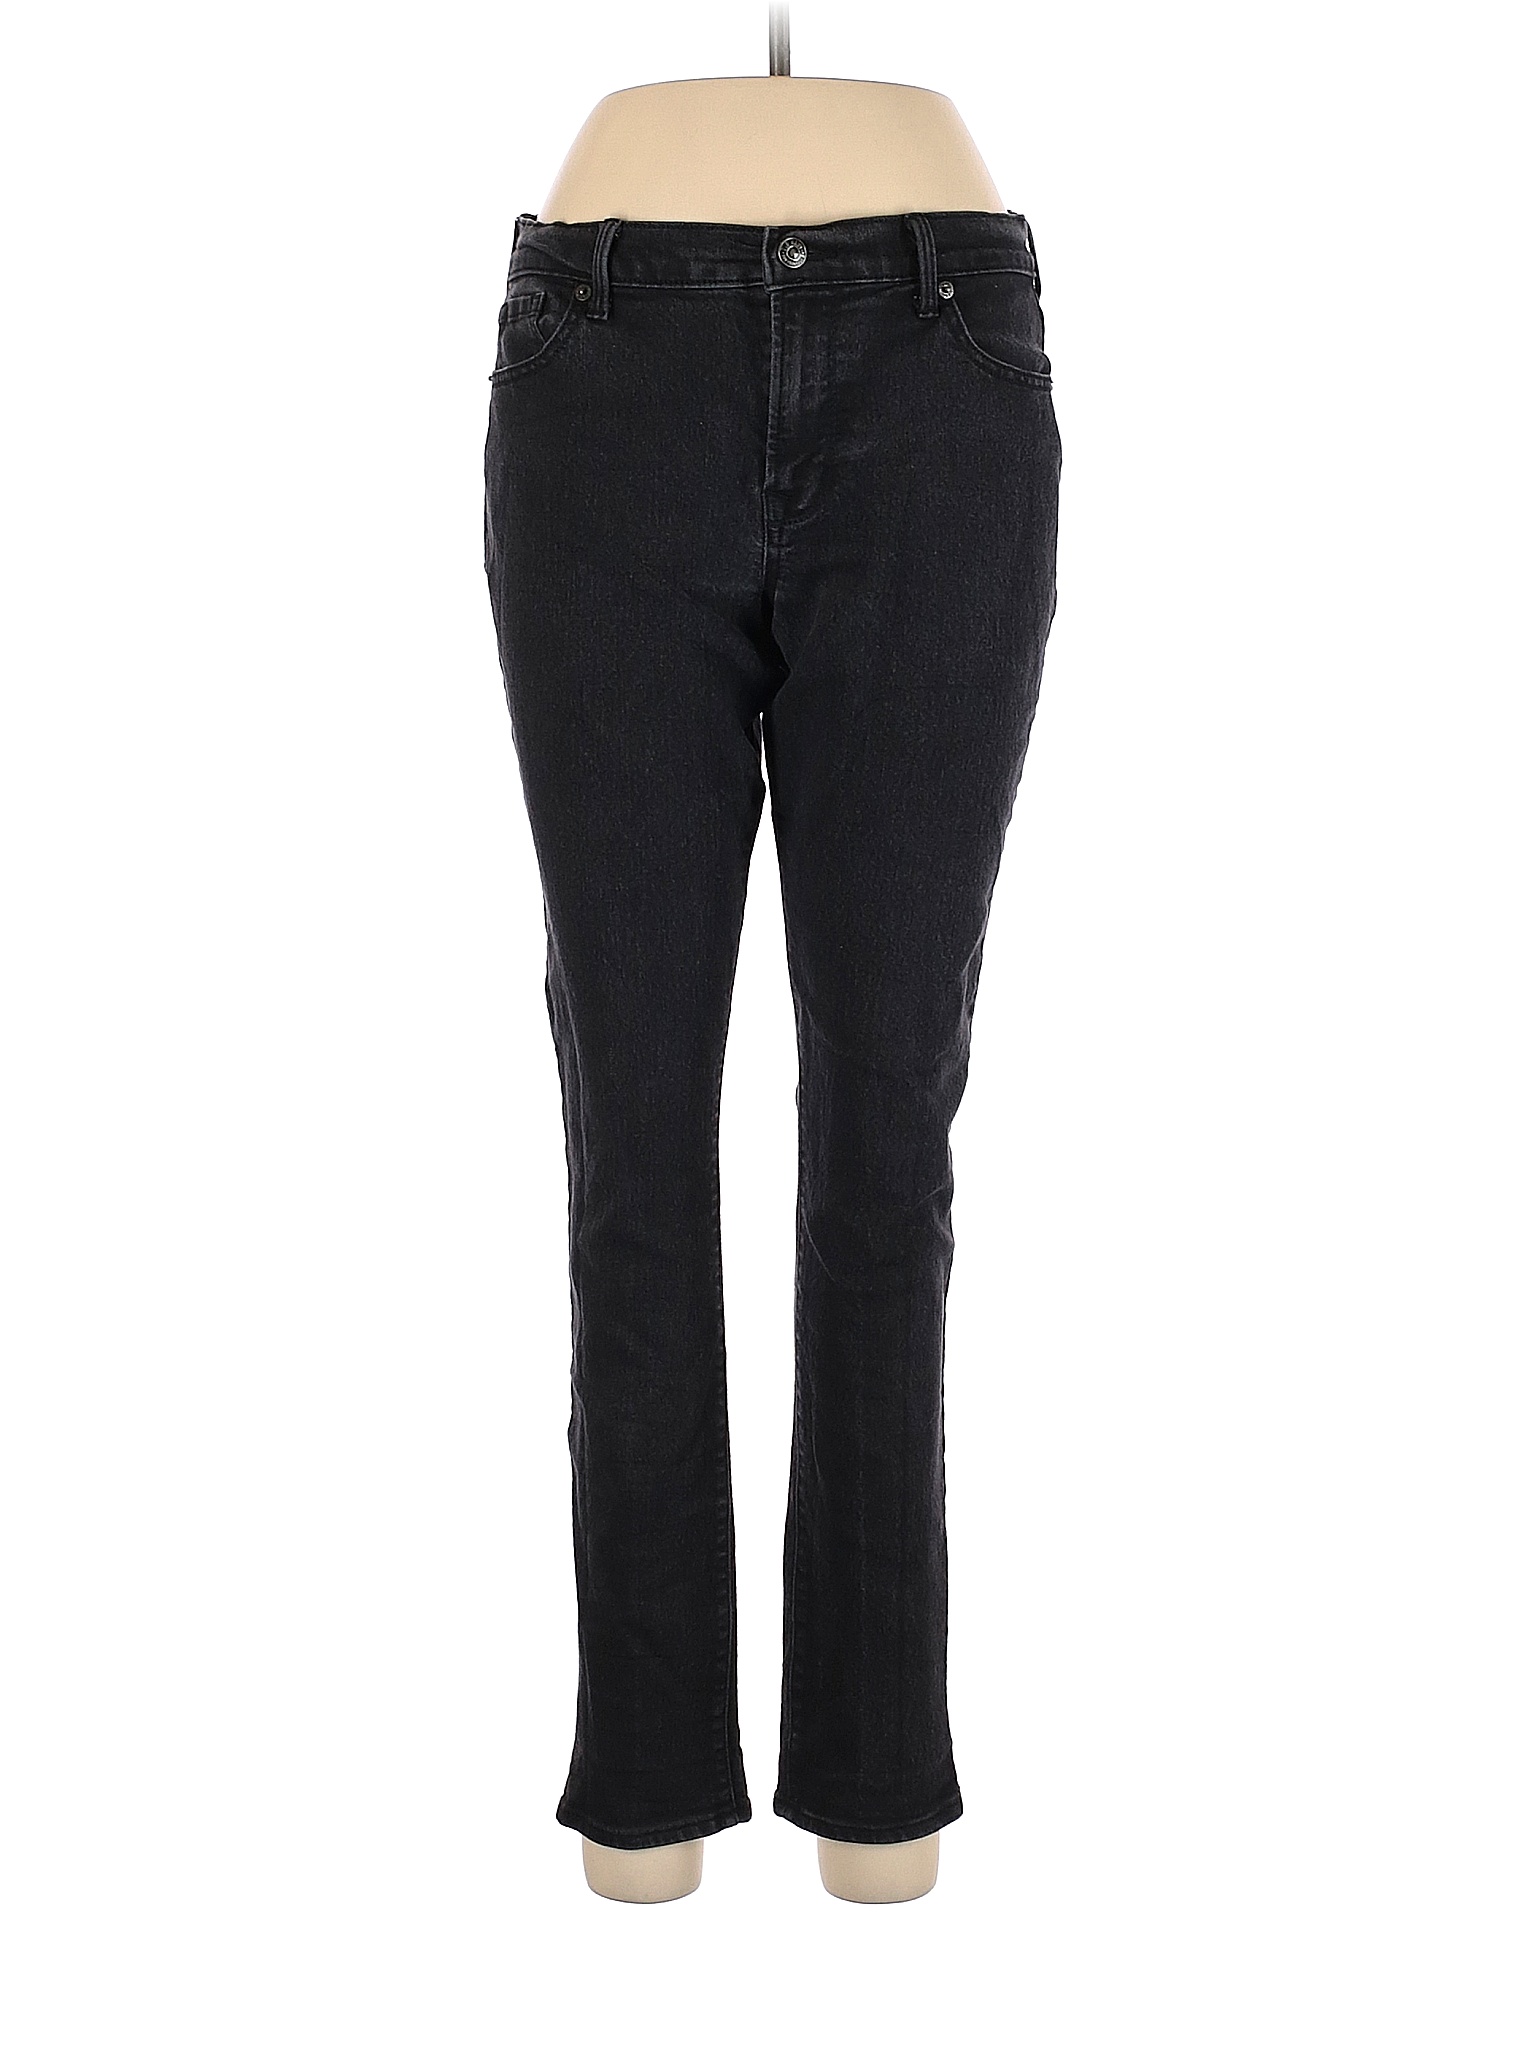 Three Dots Solid Black Jeans Size 10 - 87% off | thredUP